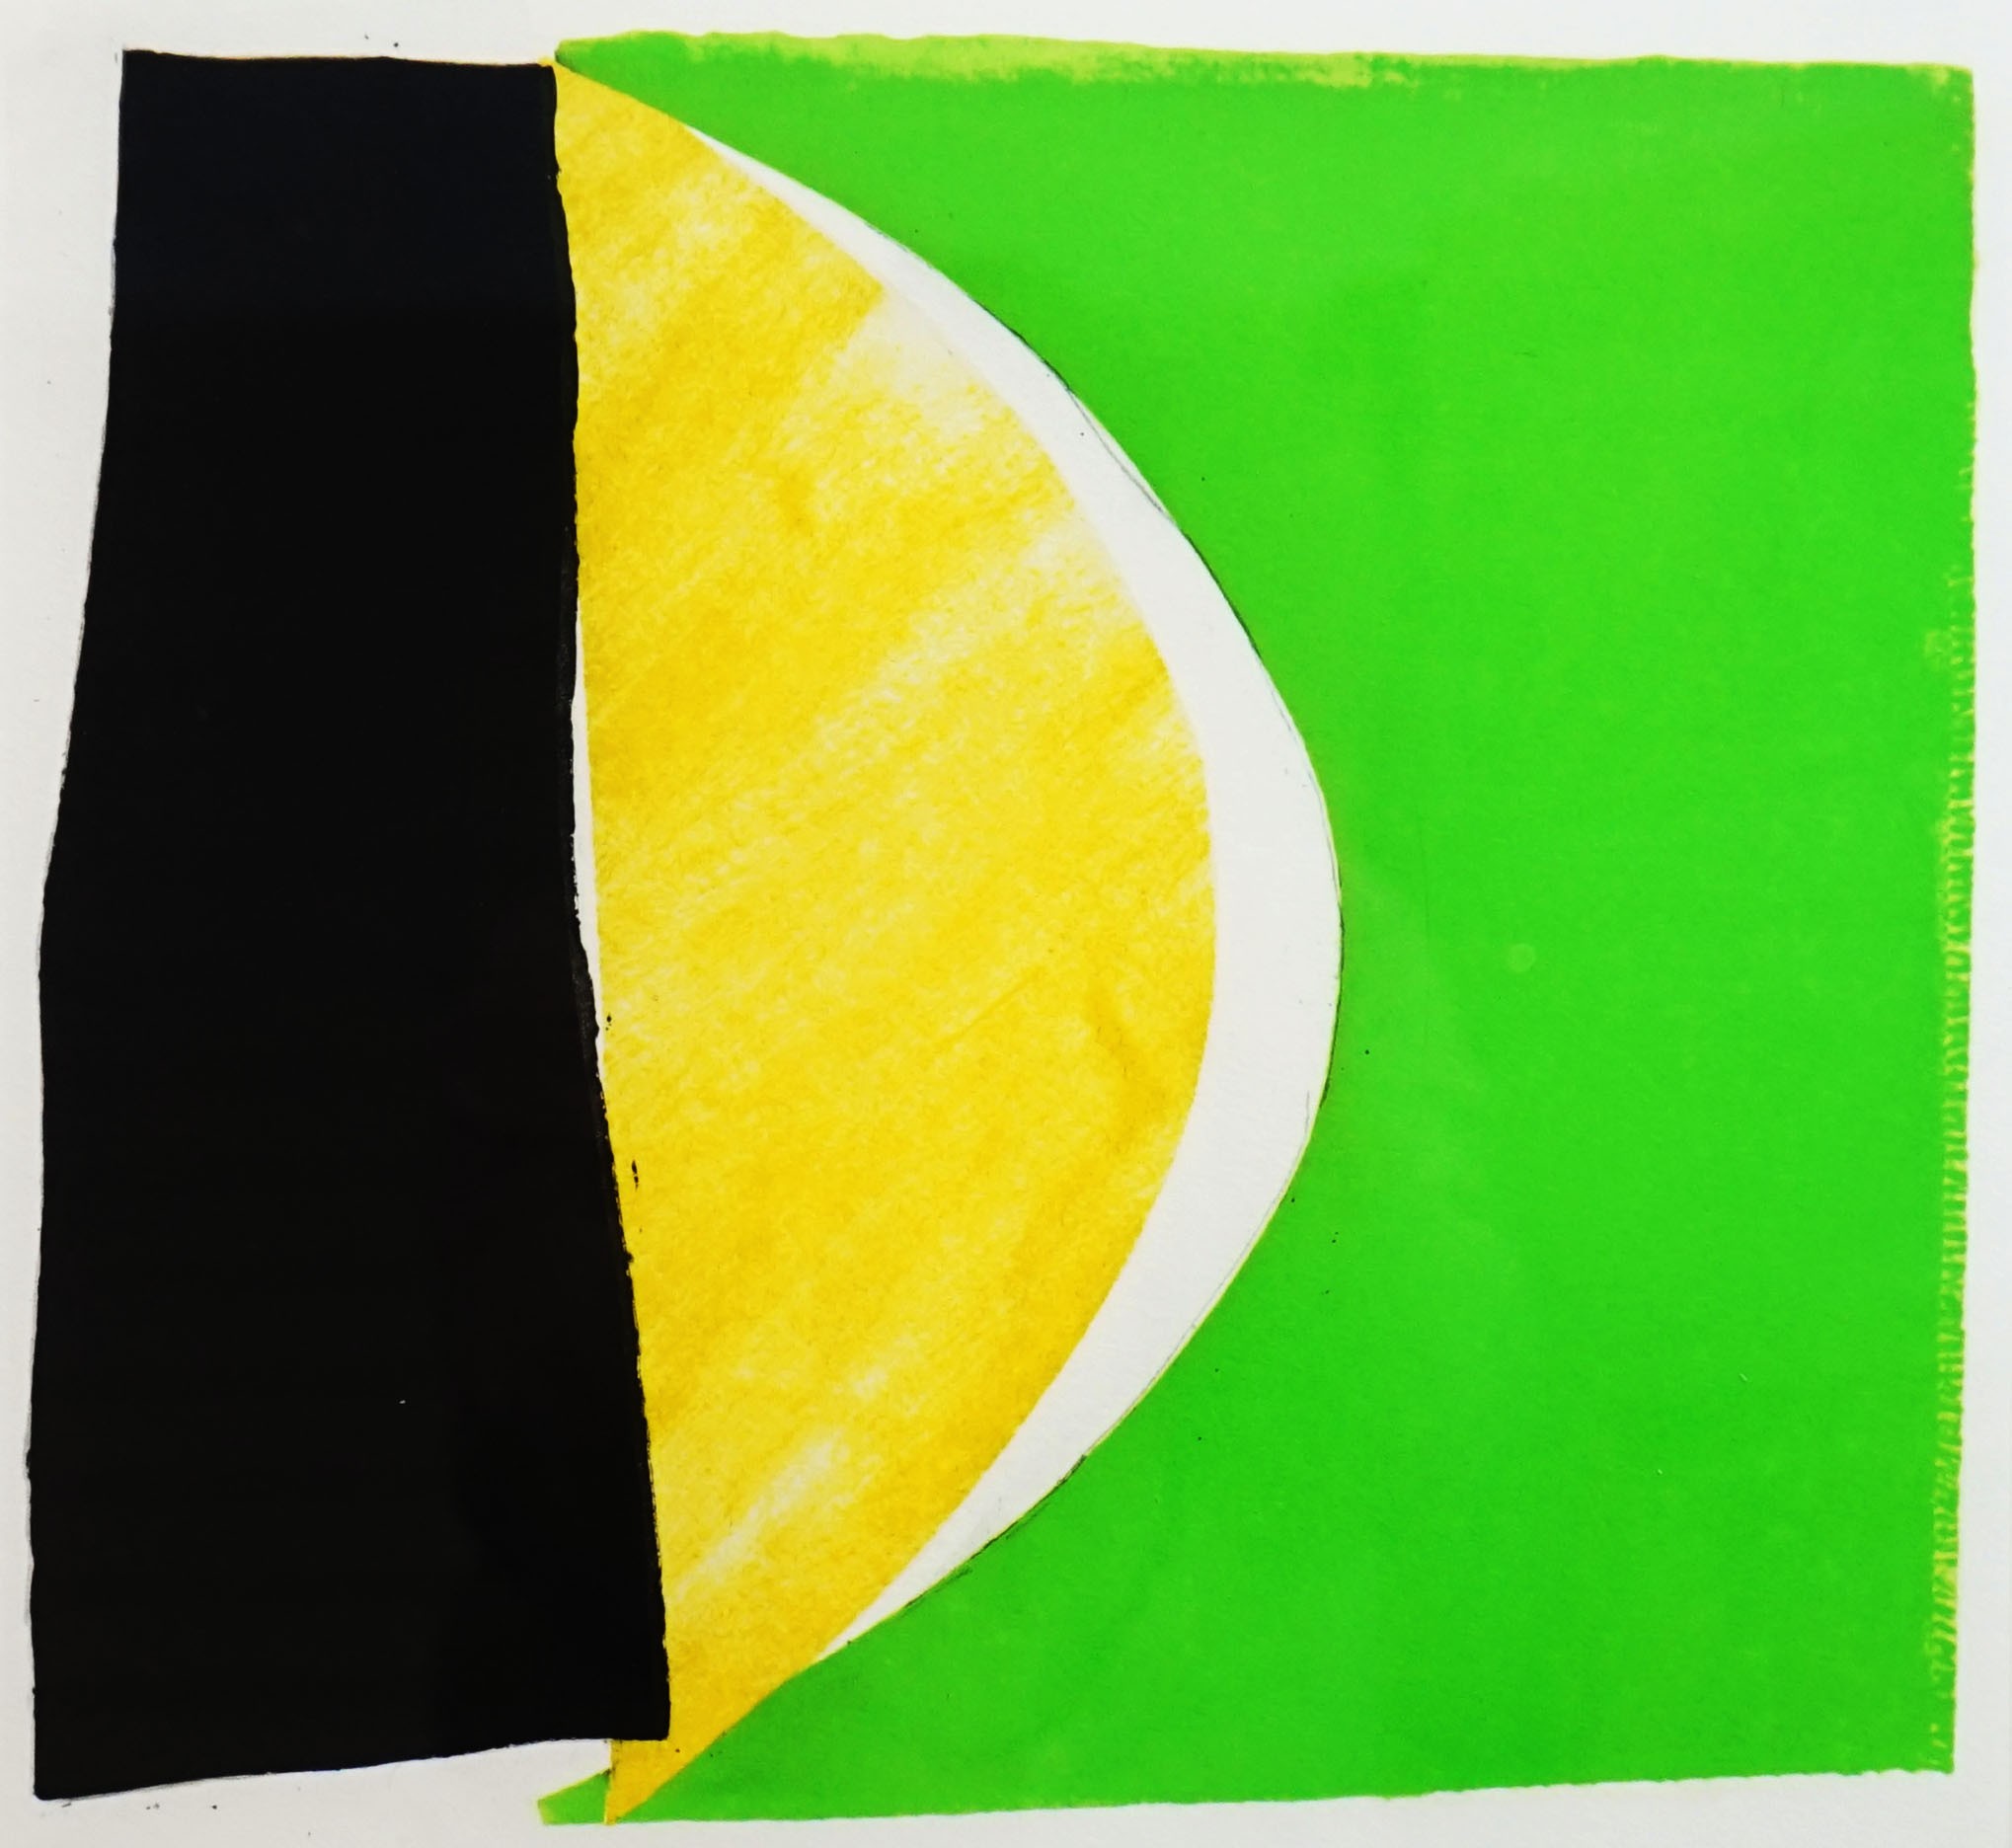 Sir Terry Frost, R.A. (1915-2003), Lemon, Green and Black, 2002, etching and aquatint on heavy wove paper, 38 x 39.5cm